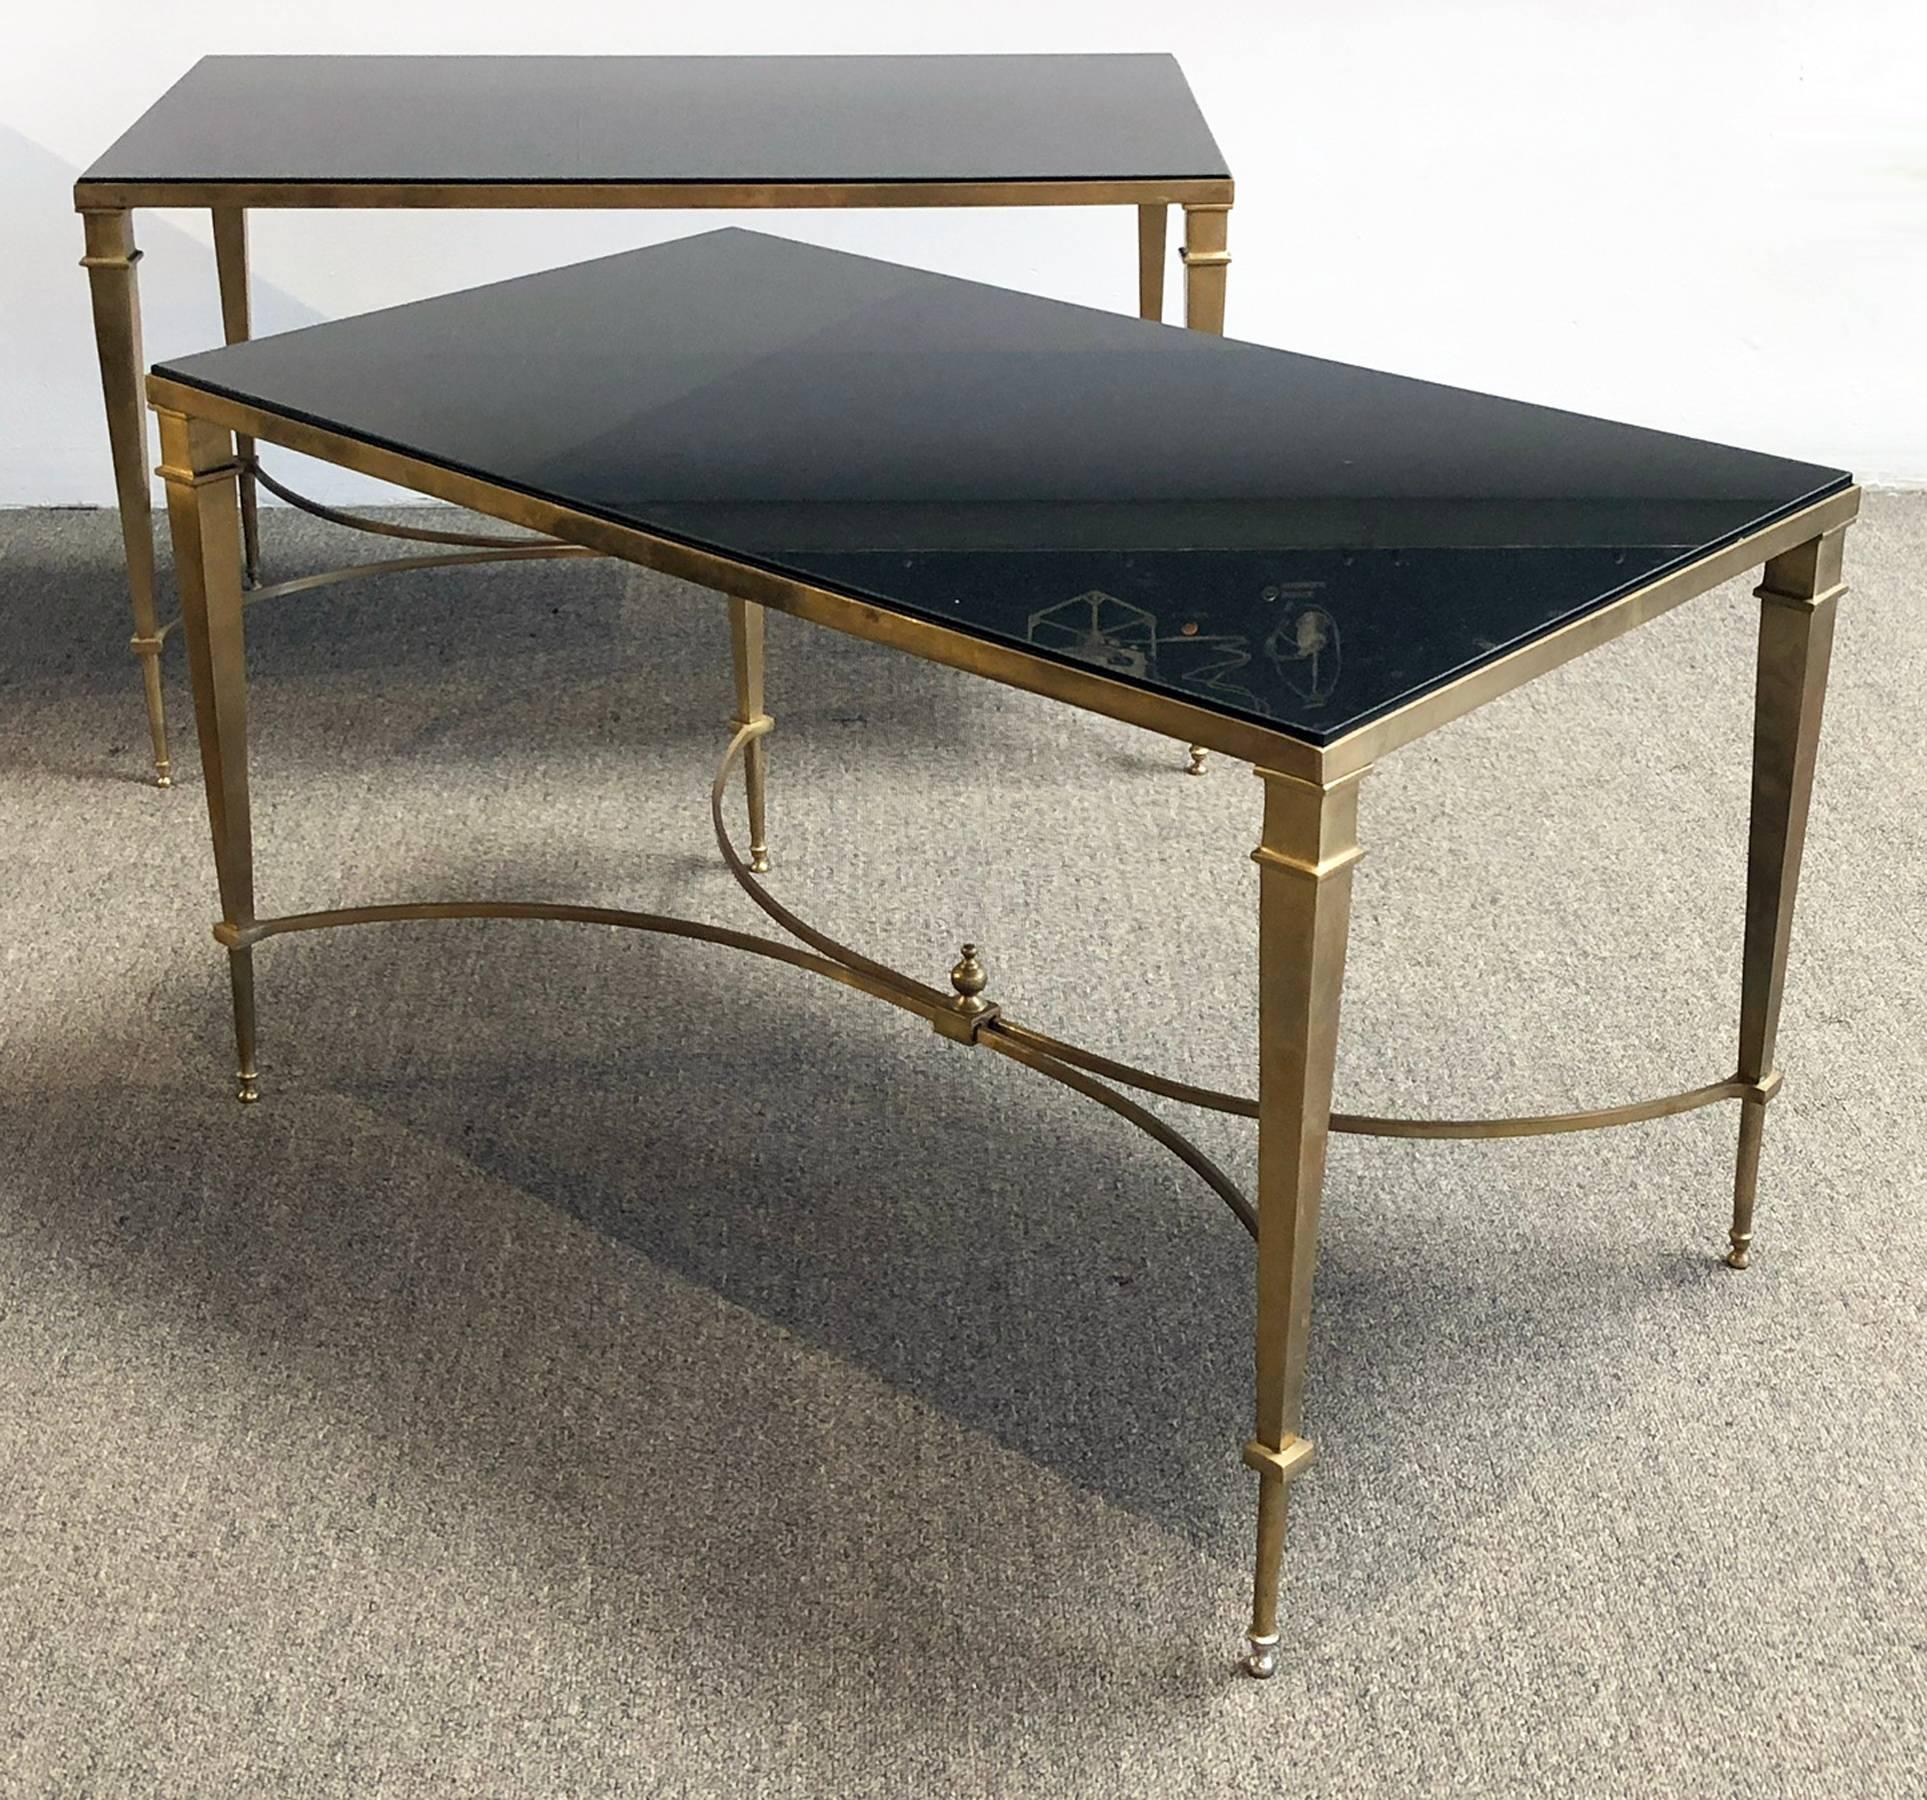 Pair of neoclassical revival tables. Price is for both. Features polished black granite tops with brass frames. The brass finish has a slightly patinated look.